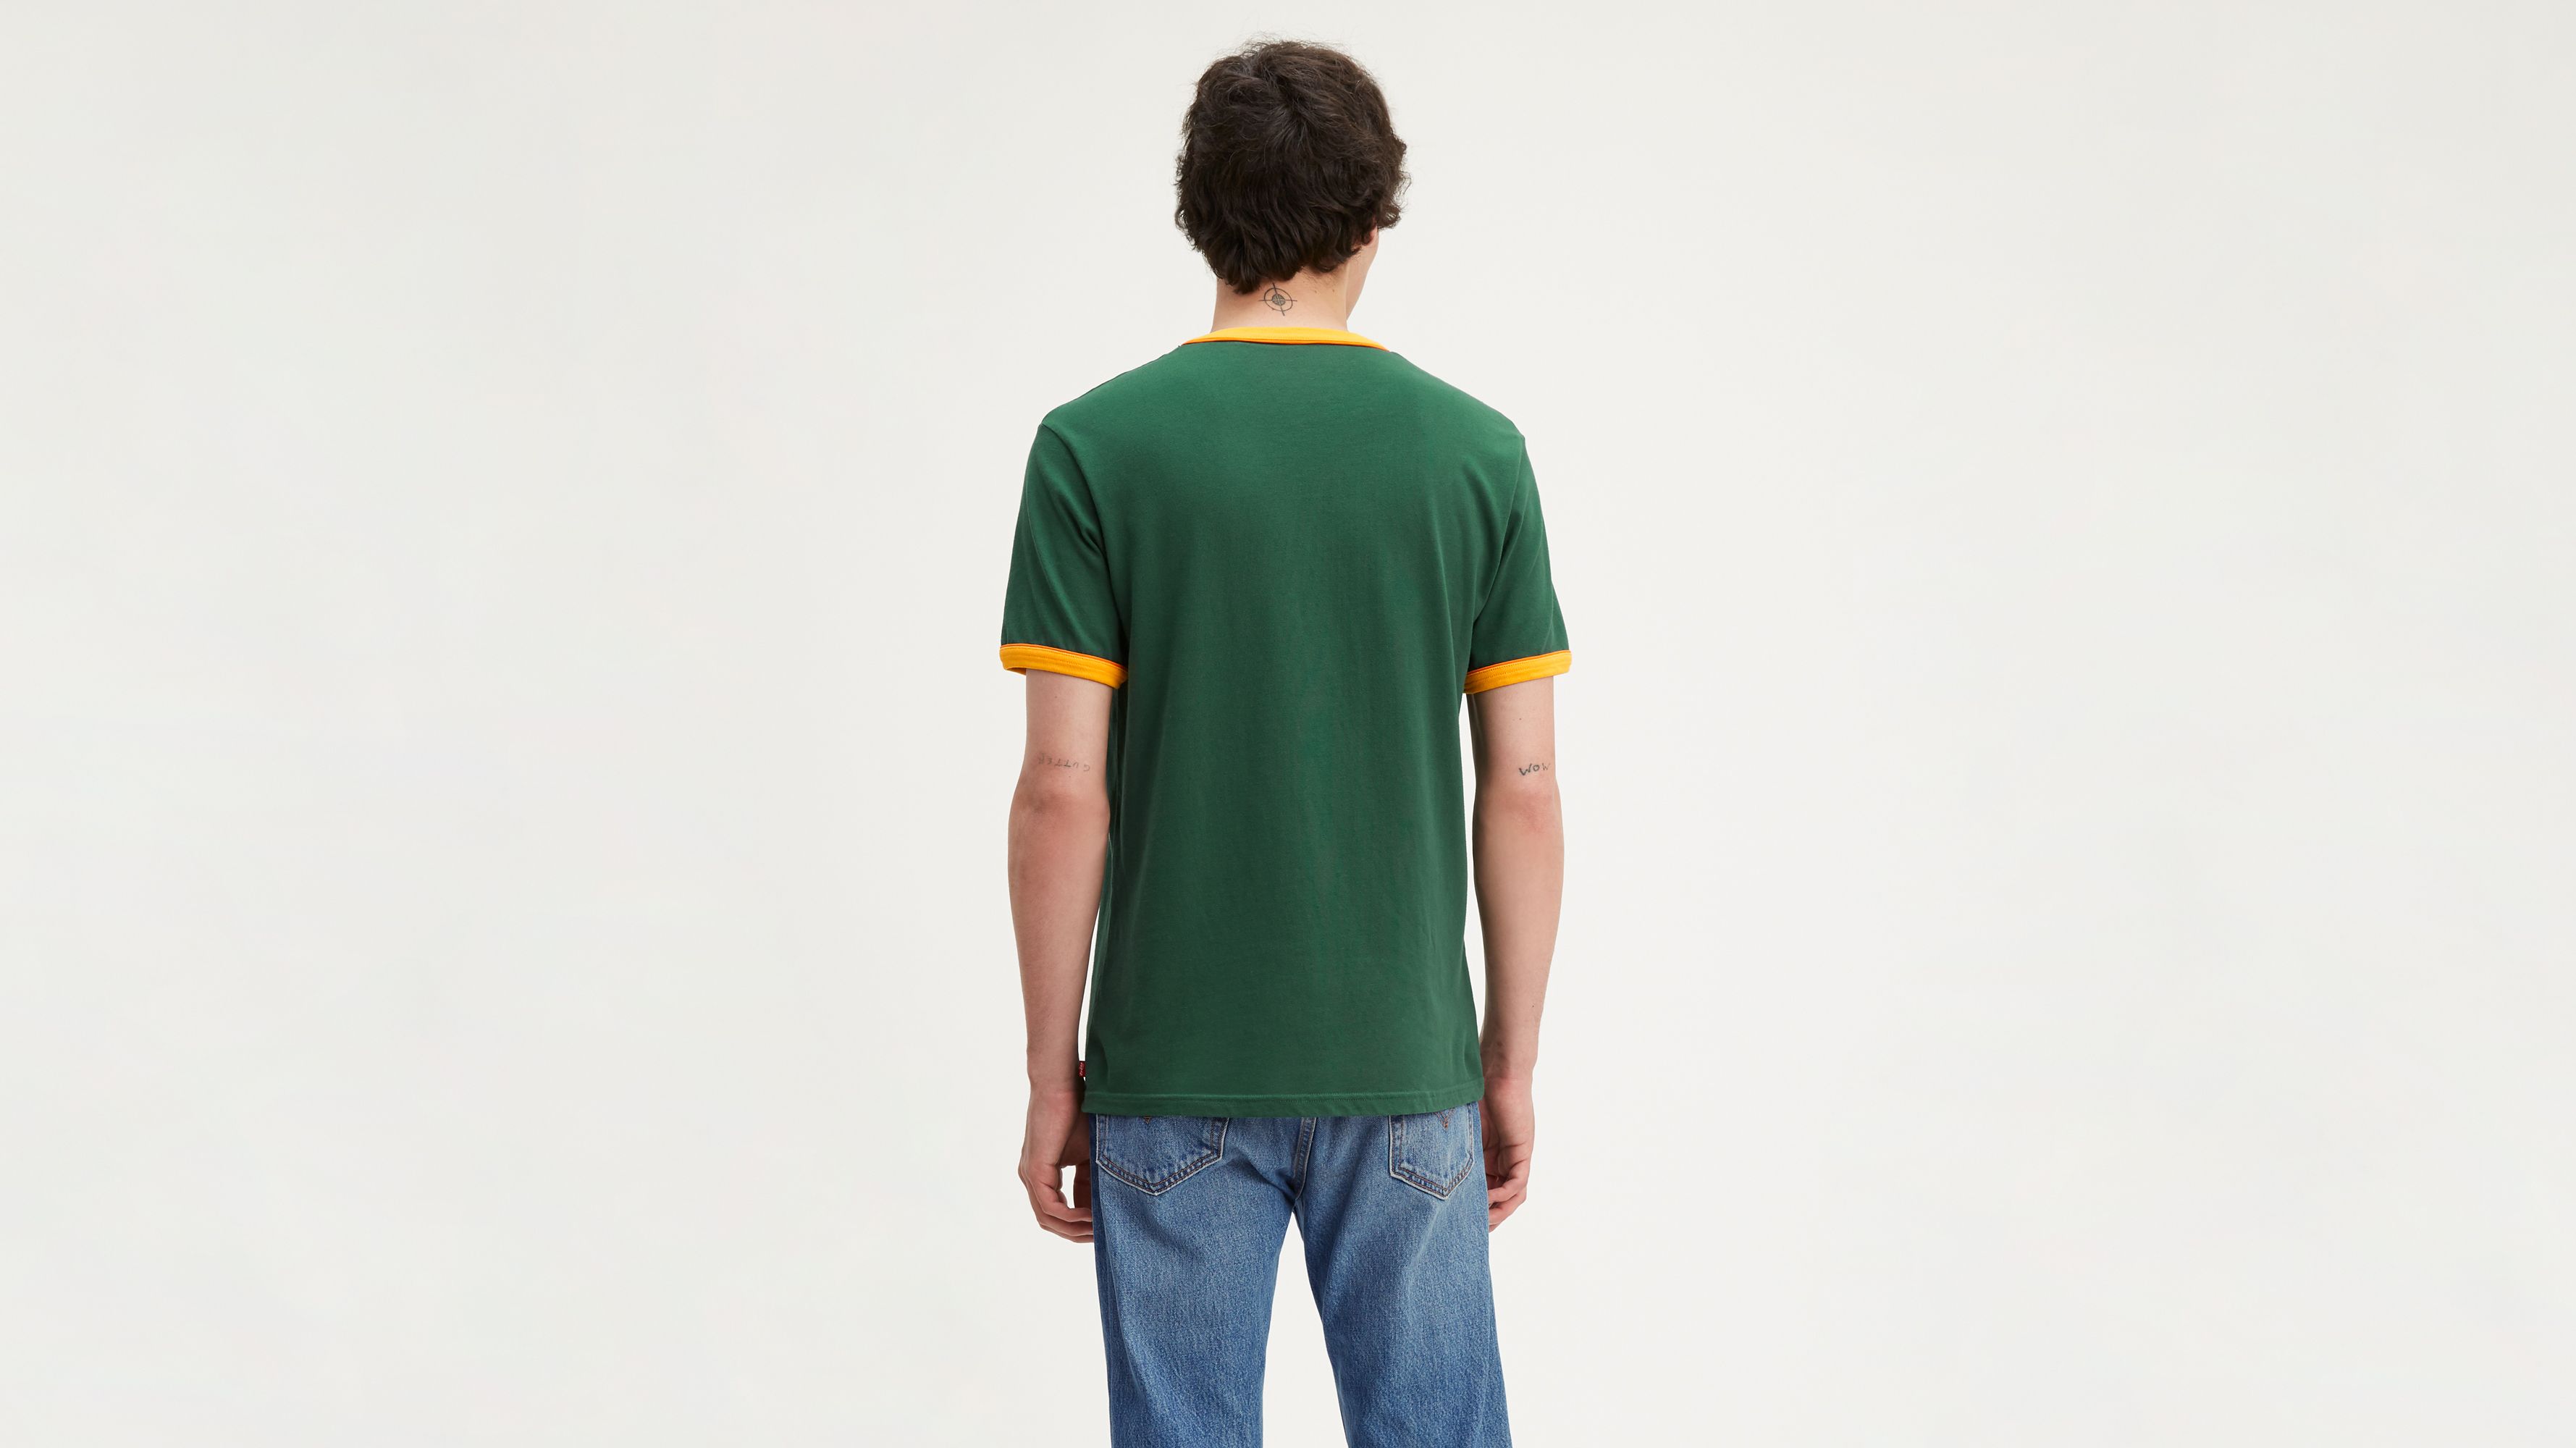 Levi's® X Stranger Things Camp Know Where Ringer Tee Shirt - Green | Levi's®  US